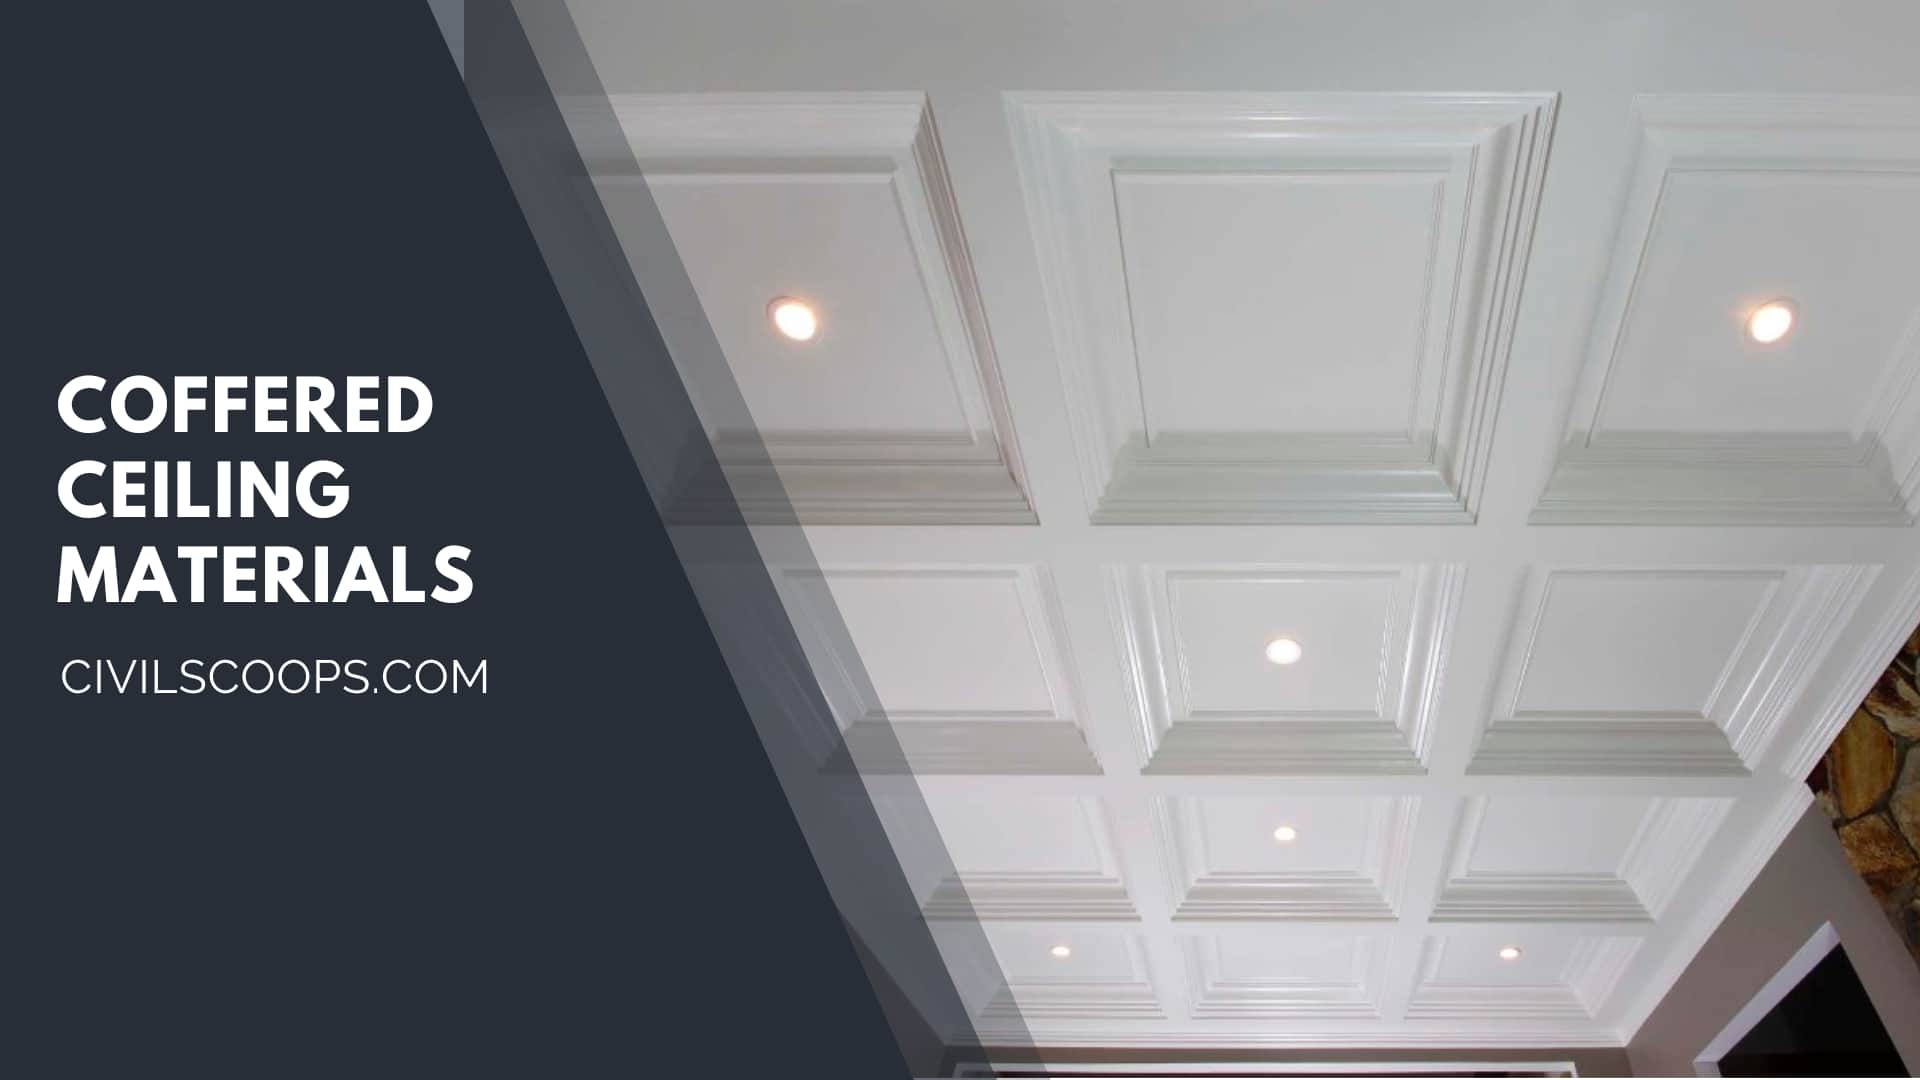 Coffered Ceiling Materials